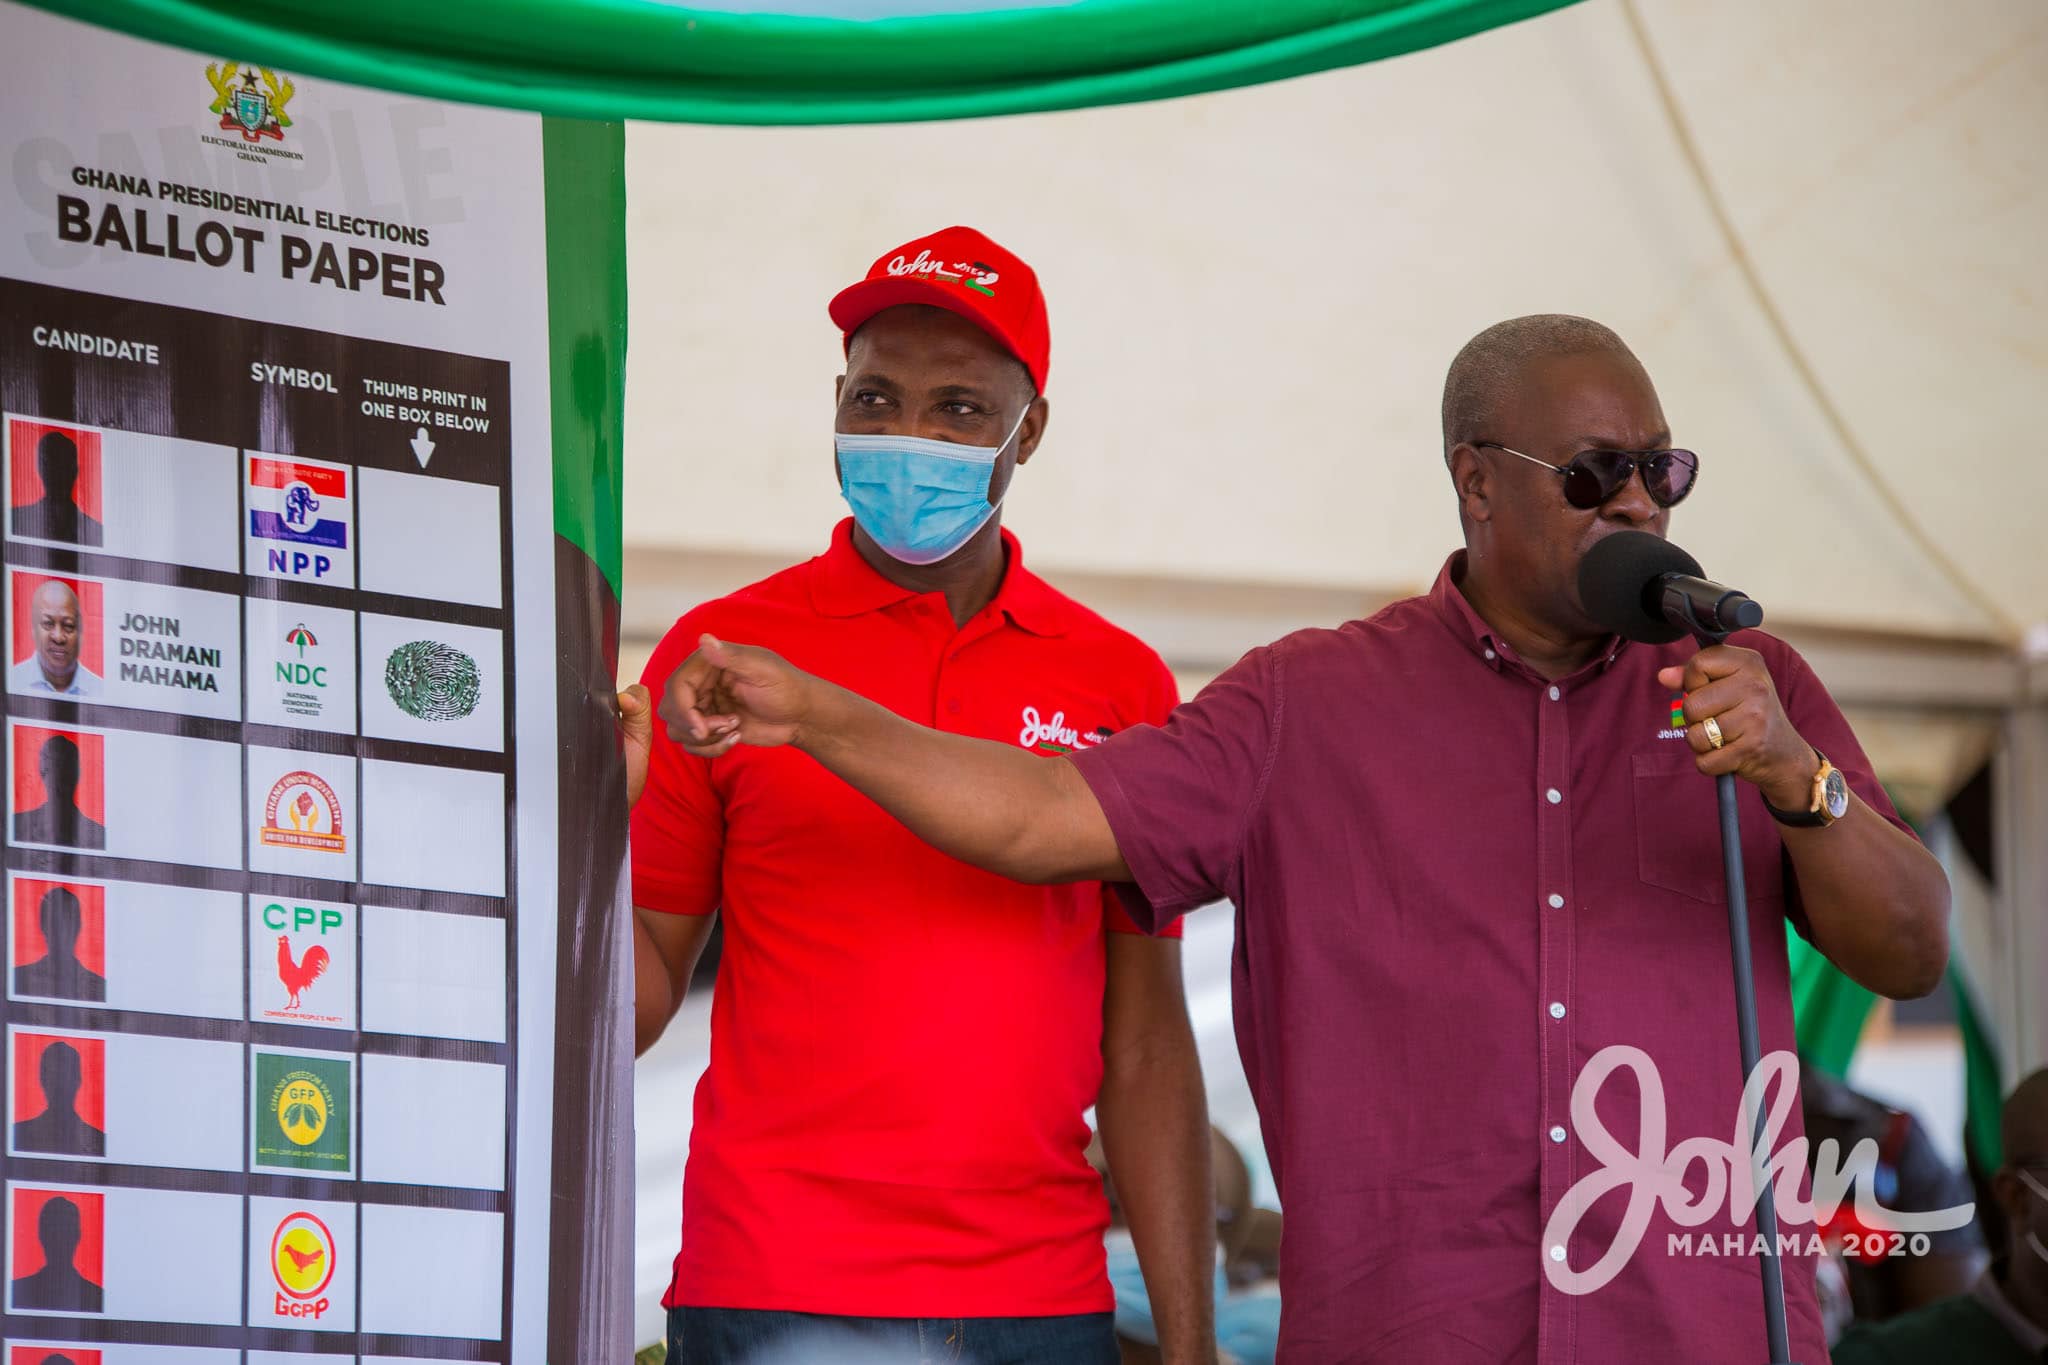 UFP becomes the third political party to endorse John Mahama